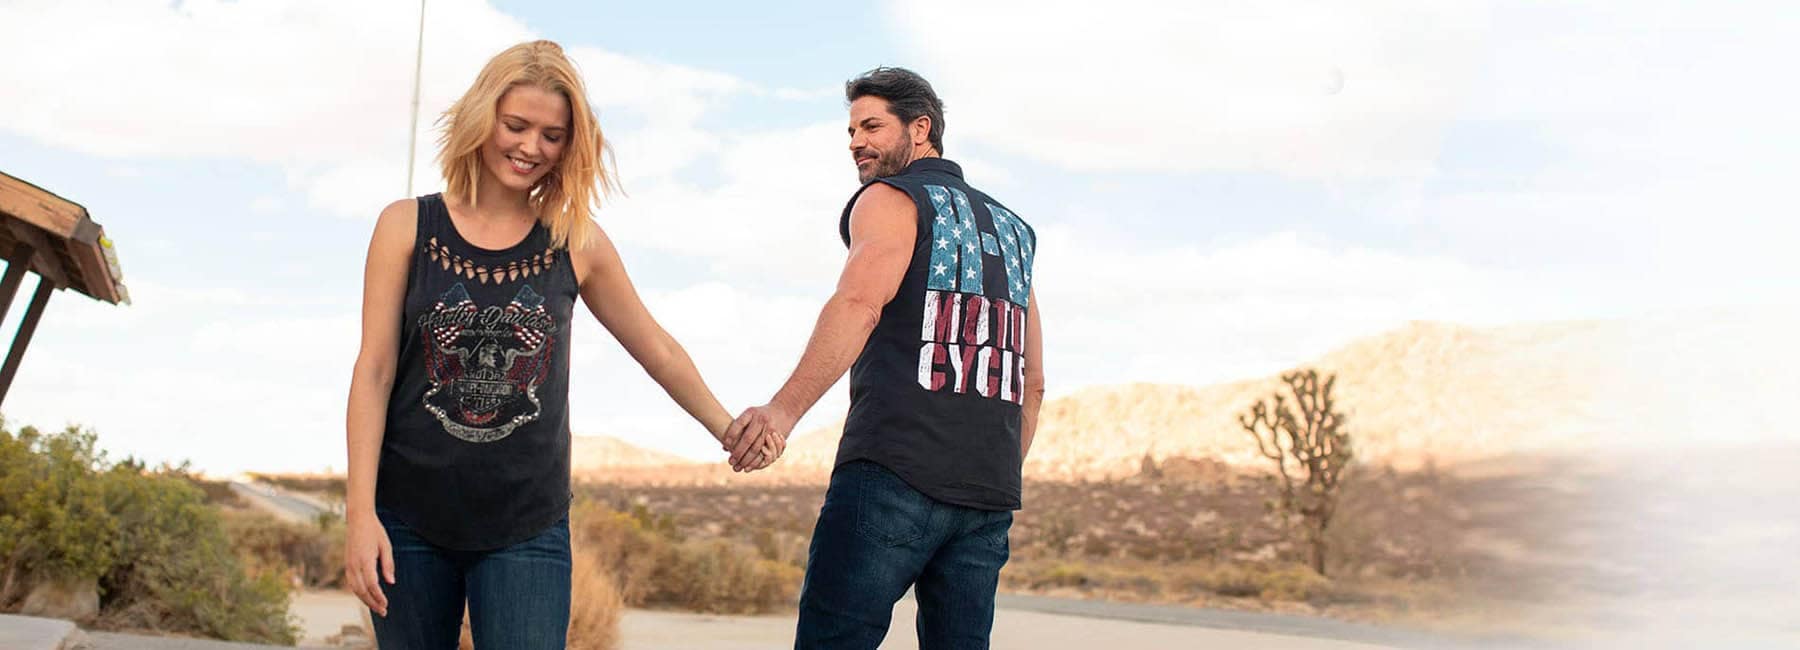 Man and Woman holding hands wearing Harley-Davidson T-shirts